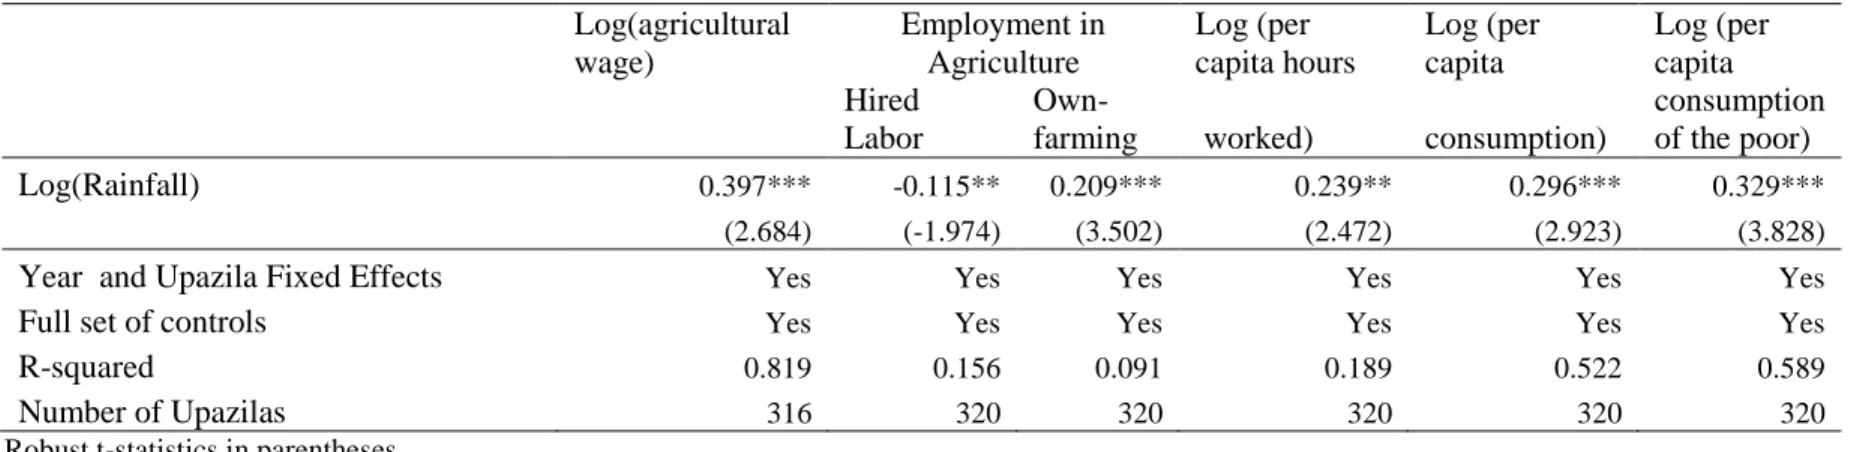 Table 4: Robustness Checks: Estimates from Predominantly Rural Sample (less than 50 percent population in urban municipalities)  Log(agricultural  wage)  Employment in Agriculture  Log (per  capita hours  Log (per capita  Log (per capita     Hired  Labor  